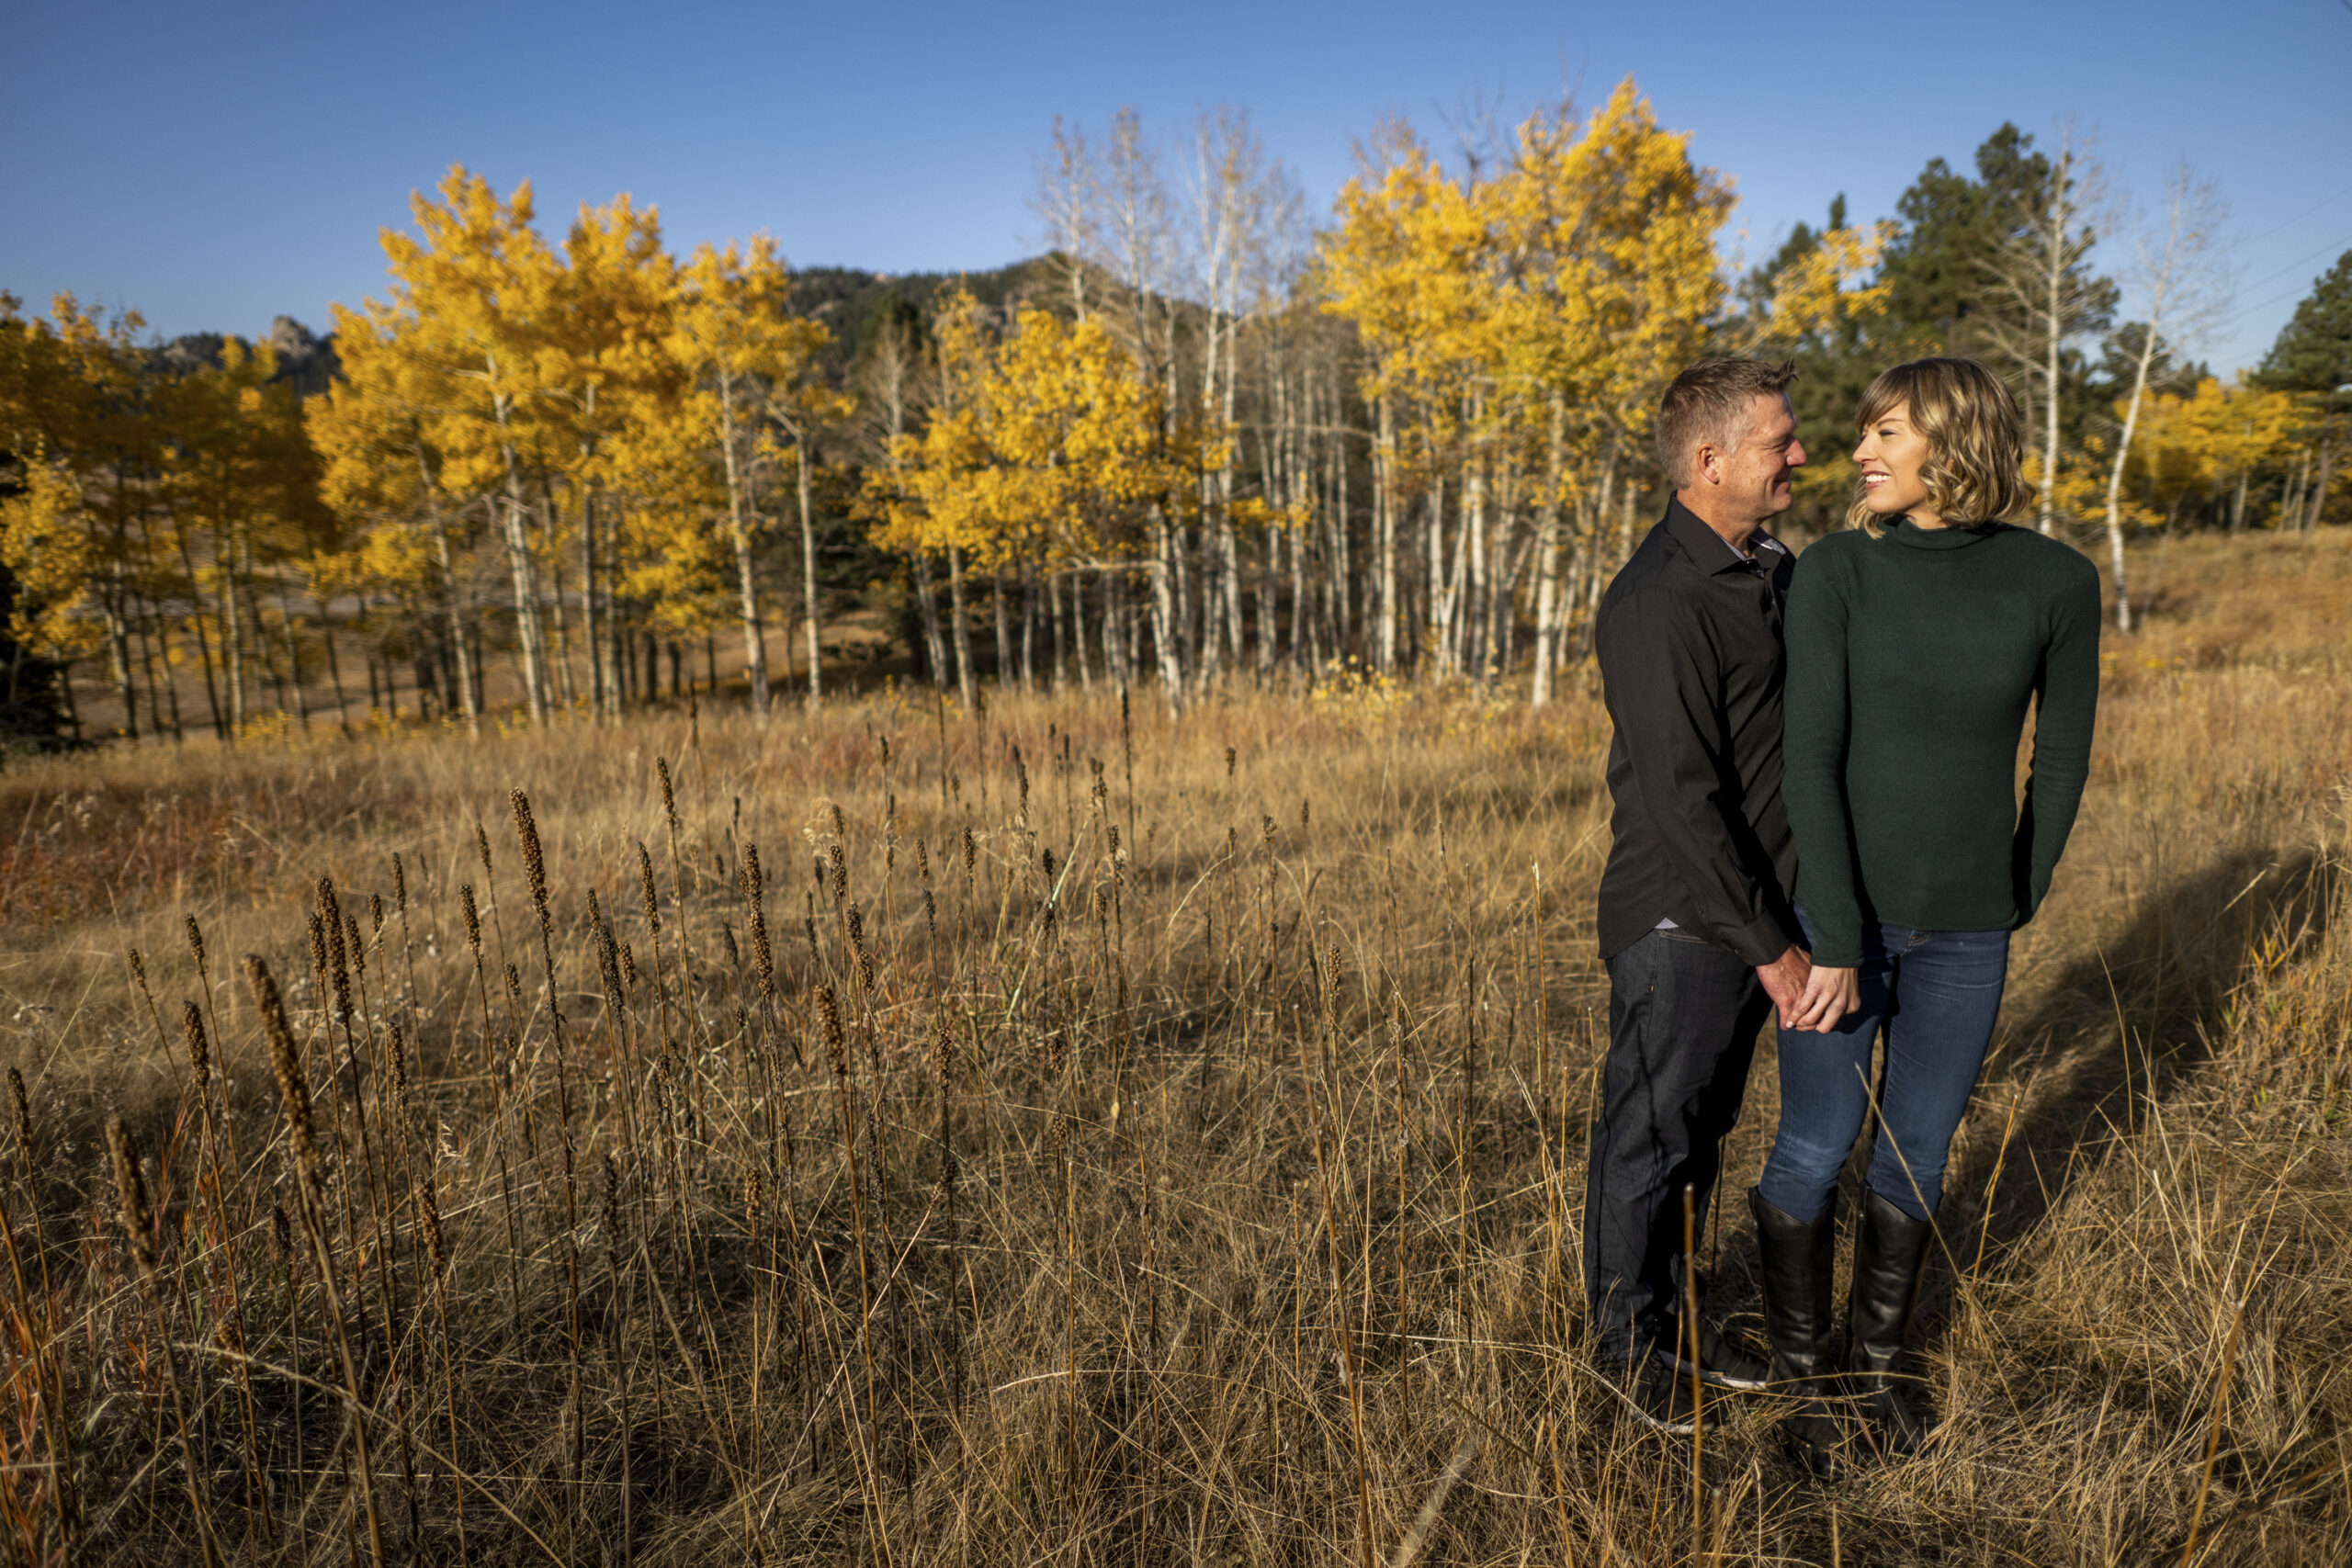 A woman in a green turtle neck stands in front of a man in a black-collared shirt and looks back at him in a field surrounded by trees with yellow trees during an engagement session at Meyer Ranch Park in Colorado.